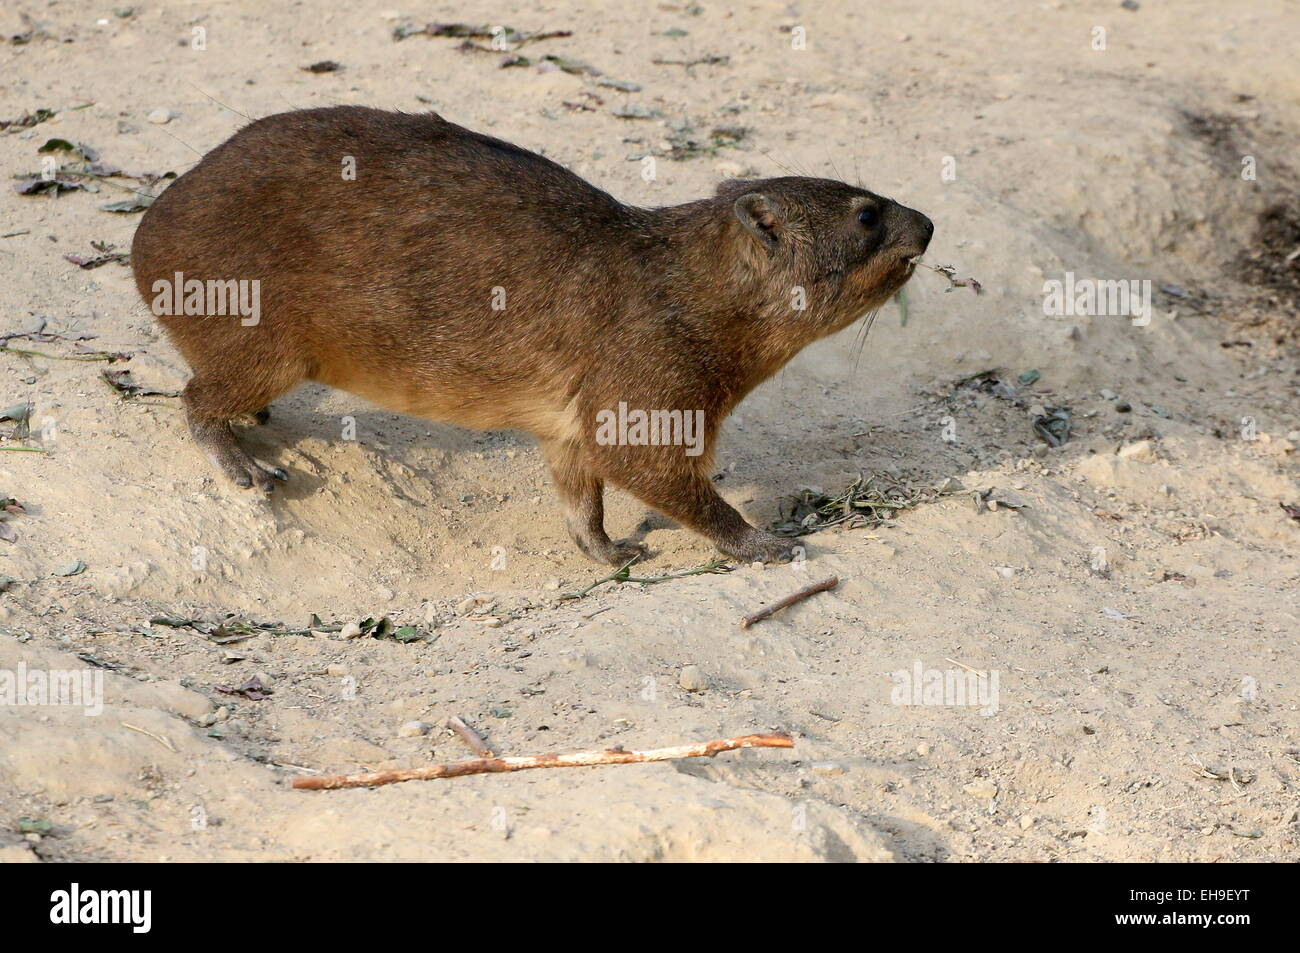 South African Cape or rock hyrax (Procavia capensis), a.k.a. Rock badger or 'Dassie' doing some exploring Stock Photo